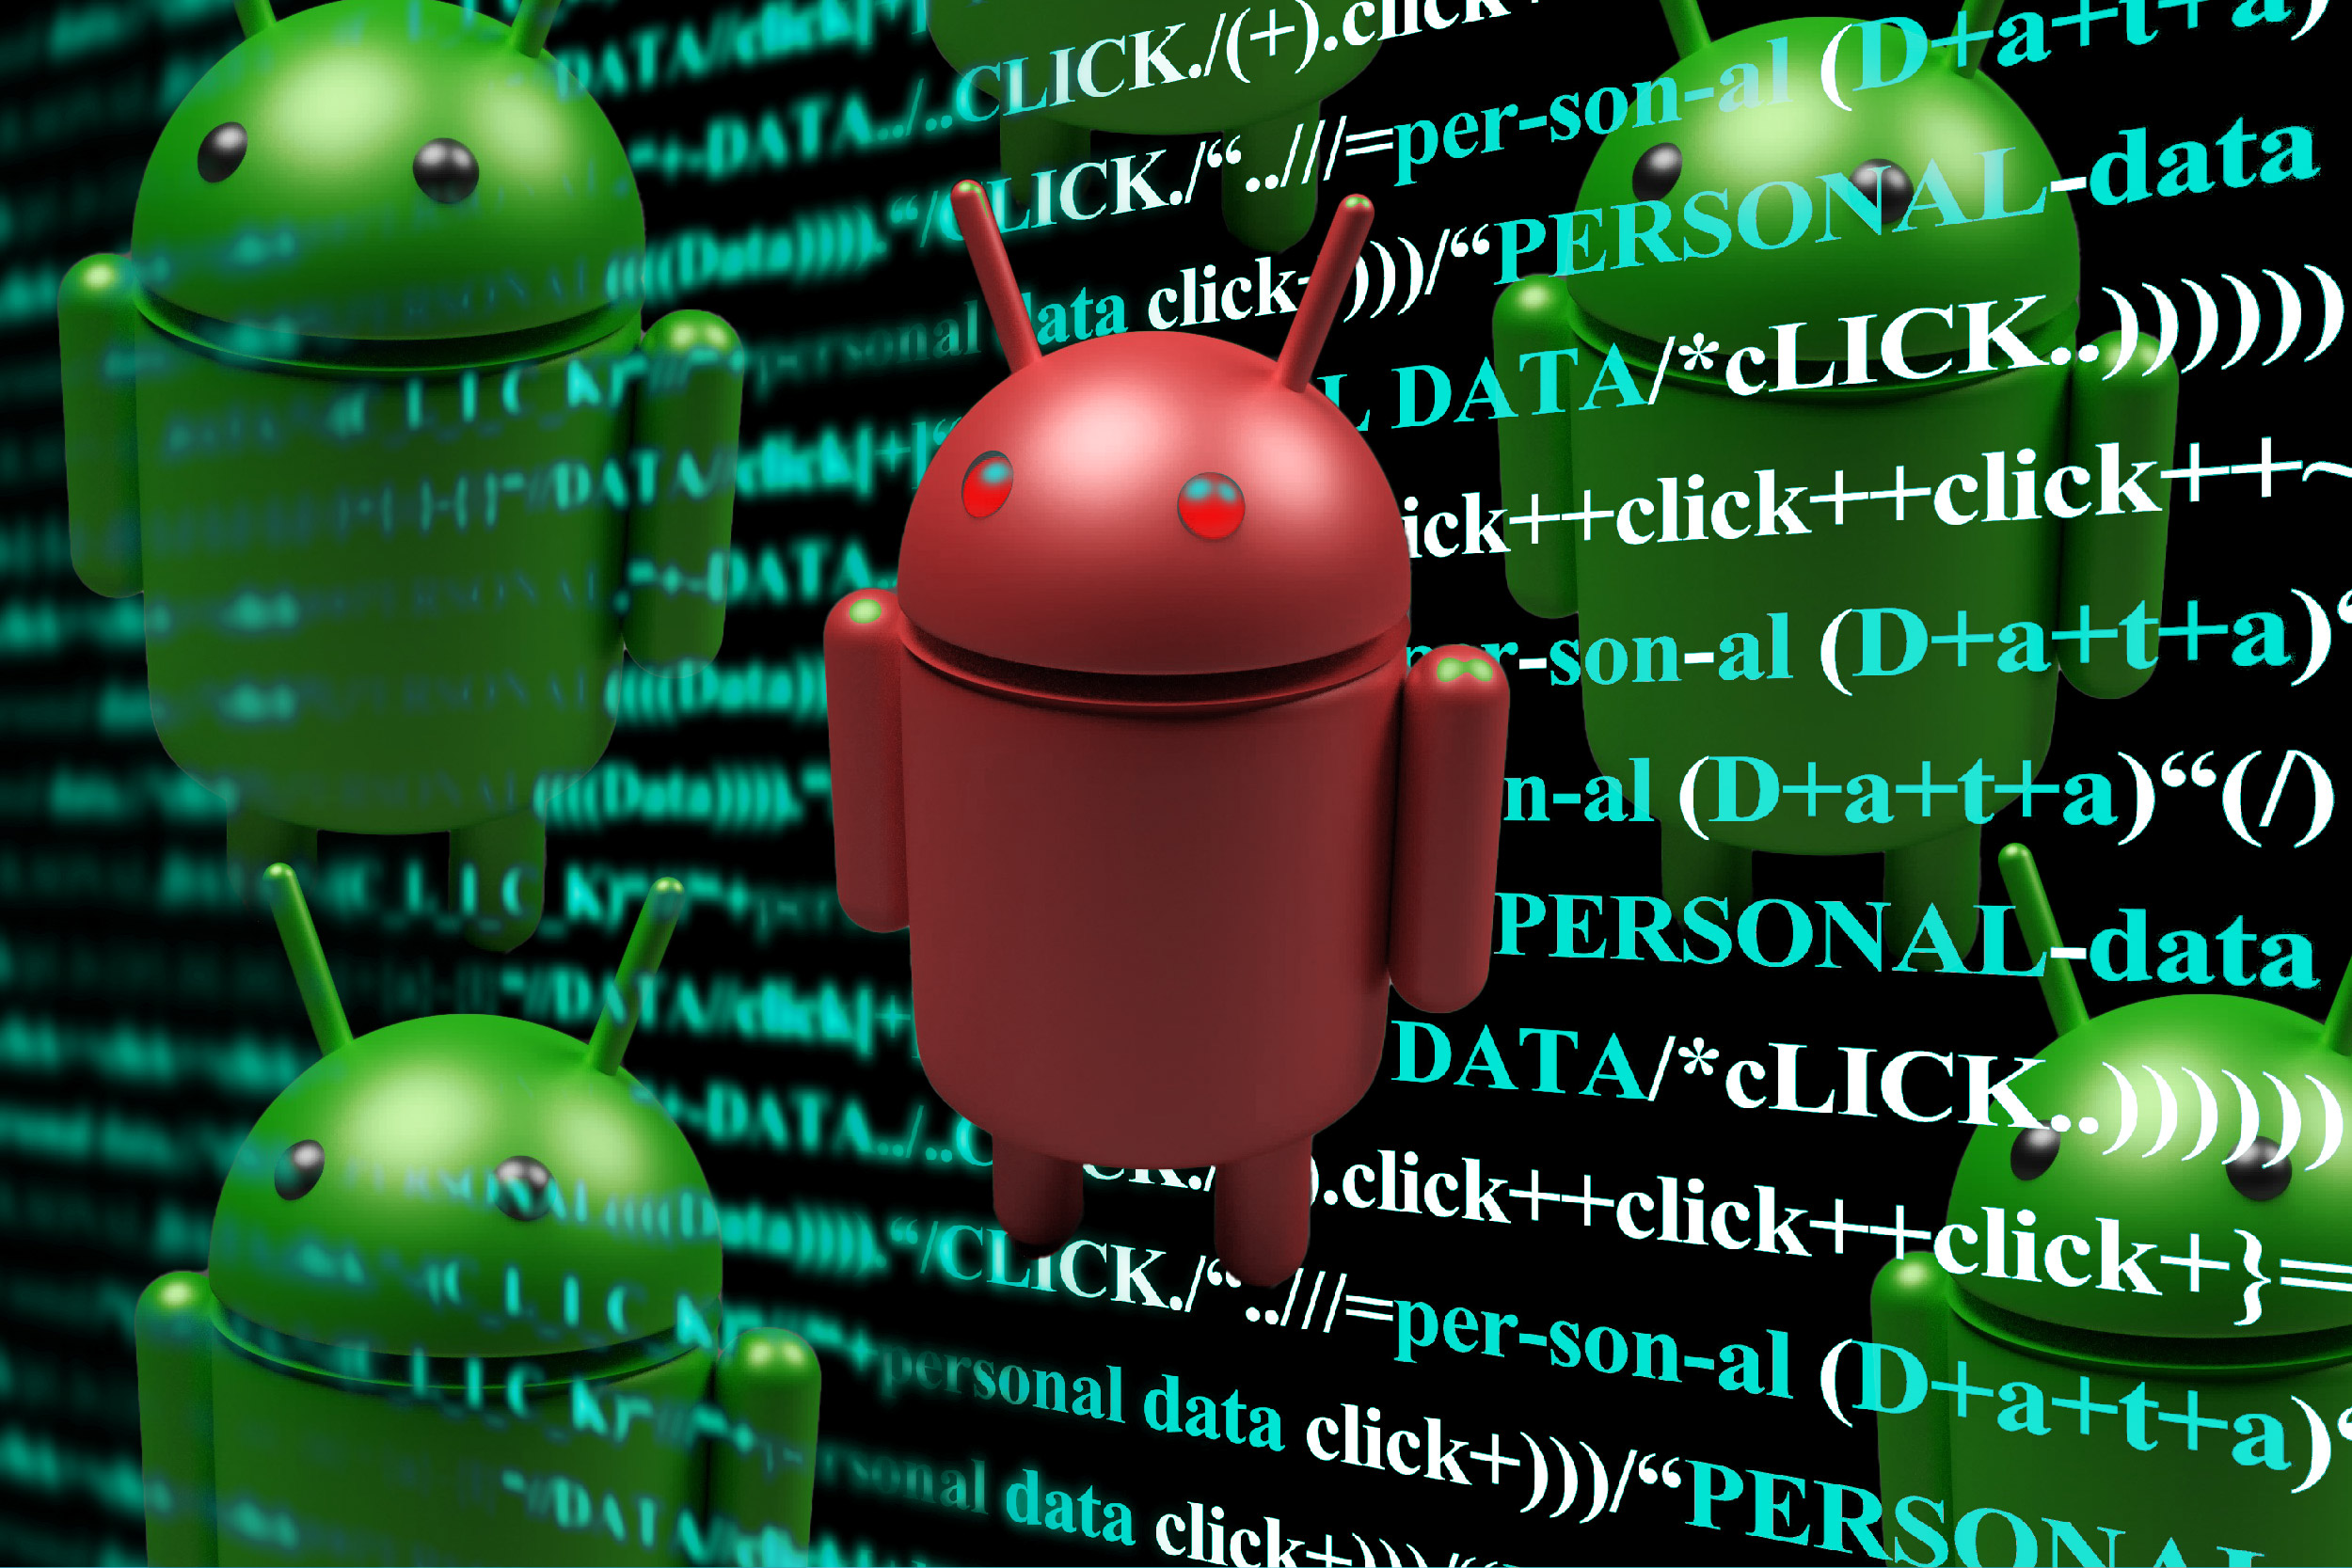 Attackers Distributing Android Malware 'FakeCalls' in South Korea